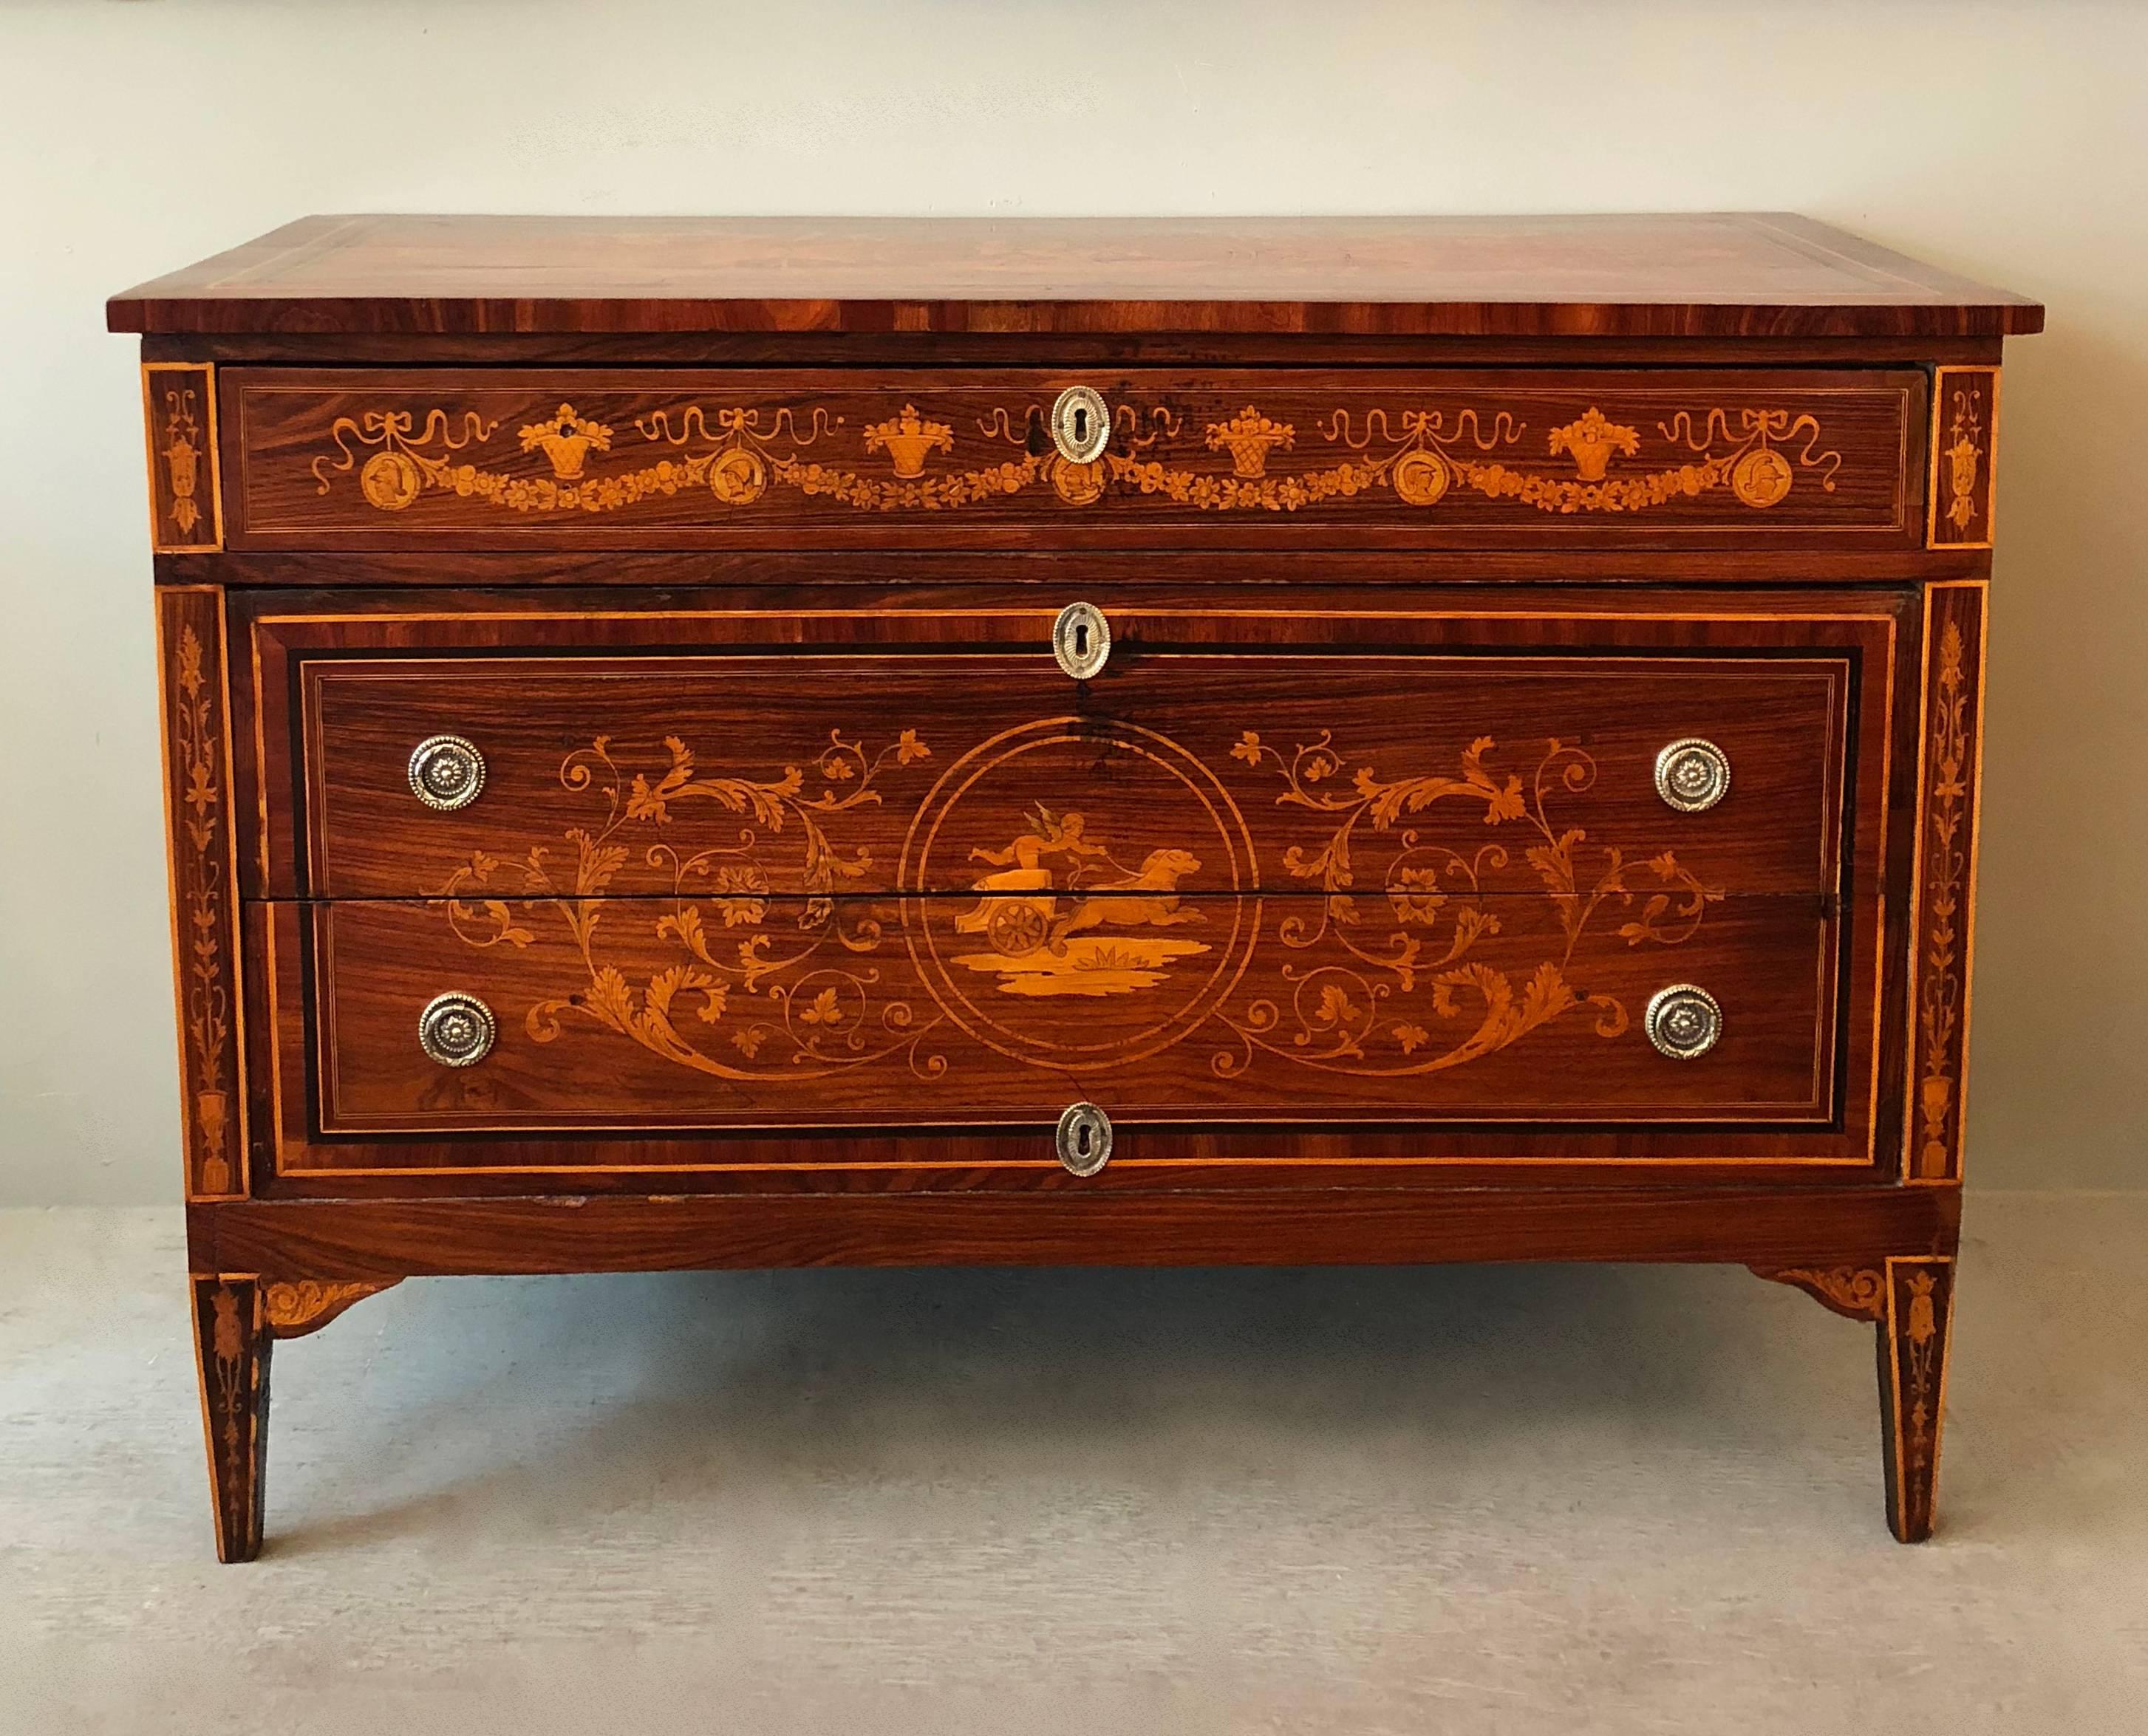 An exceptional pair of rosewood marquetry commodes. Having rectangular rosewood tops framed in seven cross-banded and inlay boarders. The center of the tops have Classical Mythological medallions depicting 